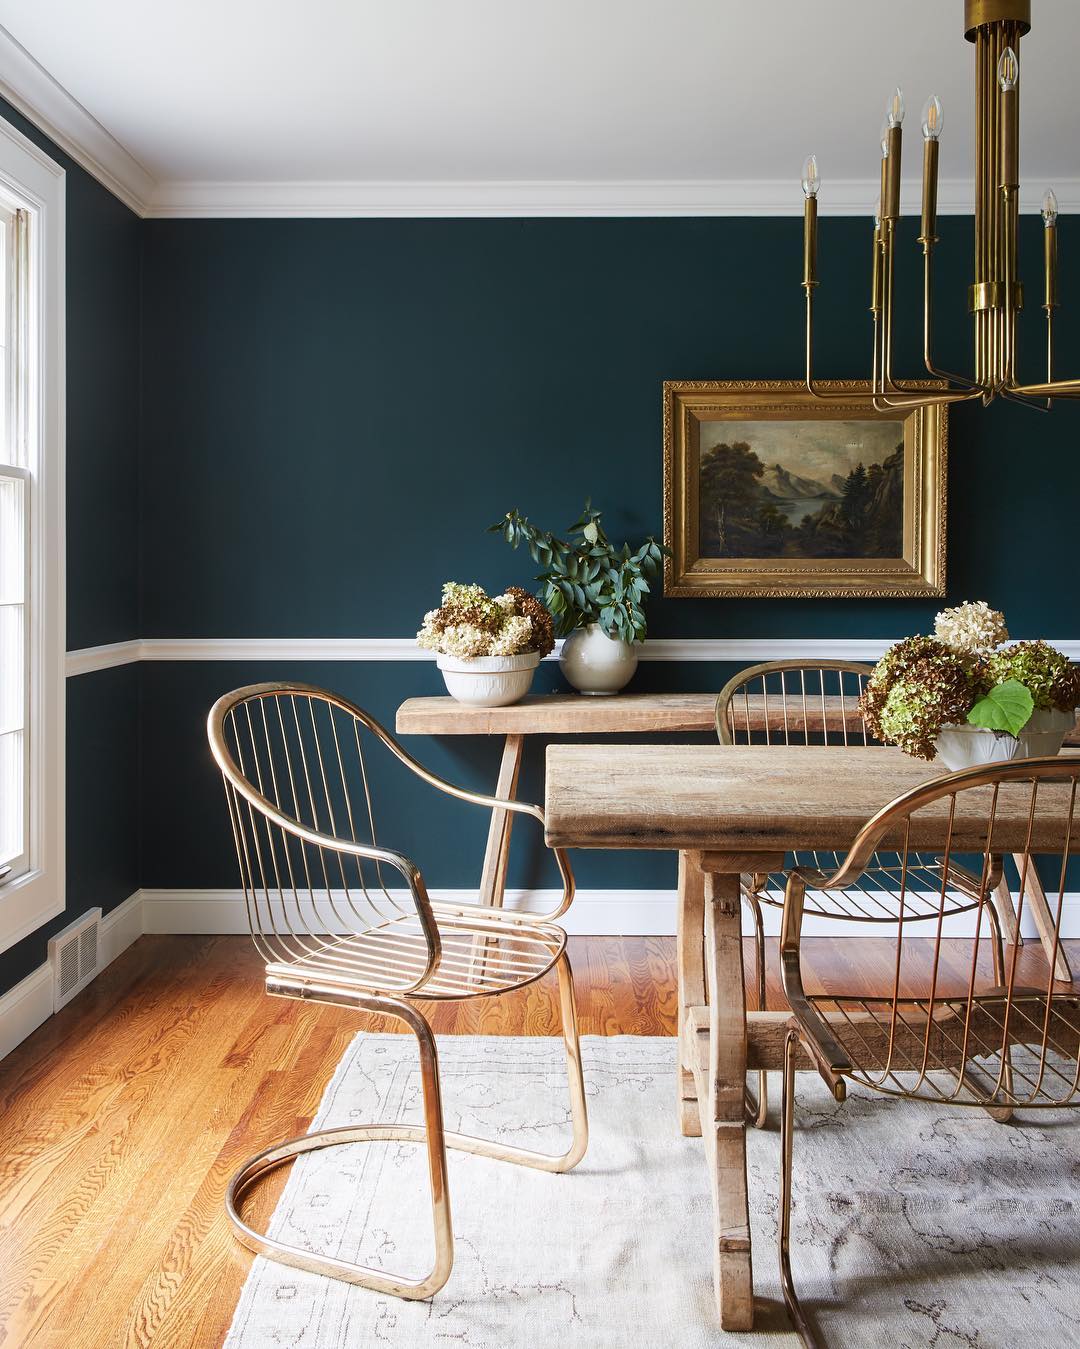 Dining room painted in forest green color with wood table and chairs. Photo by Instagram user @leannefordinteriors